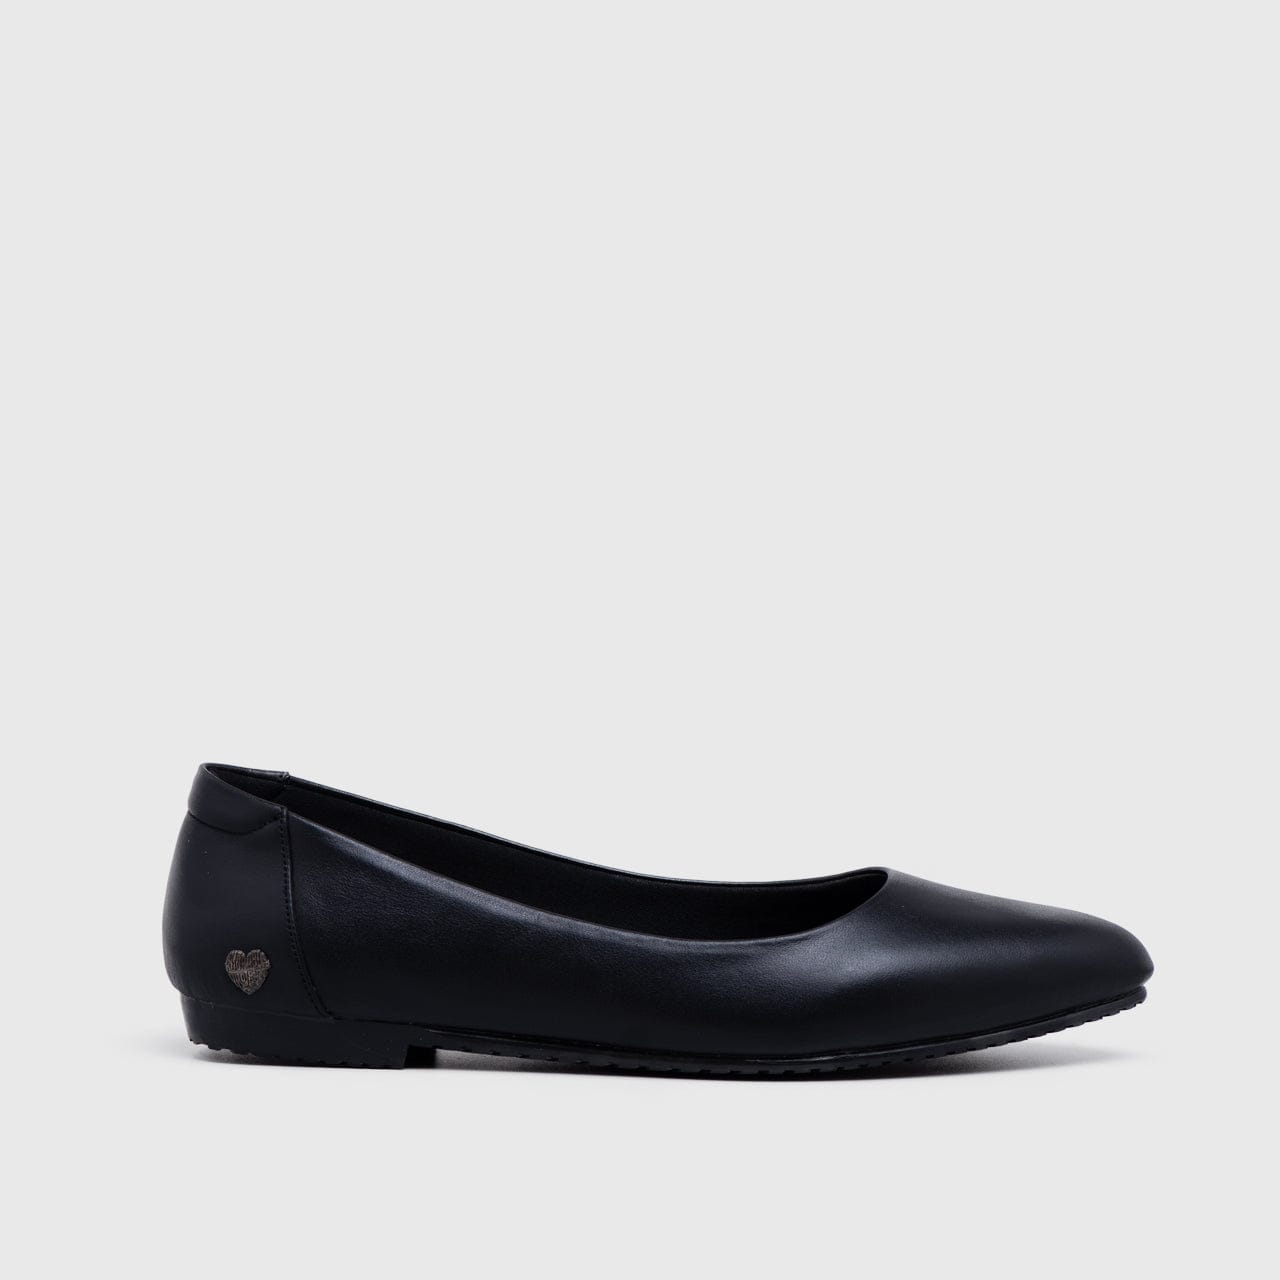 Adorable Projects Official Ariella Flat Shoes Genuine Leather Black